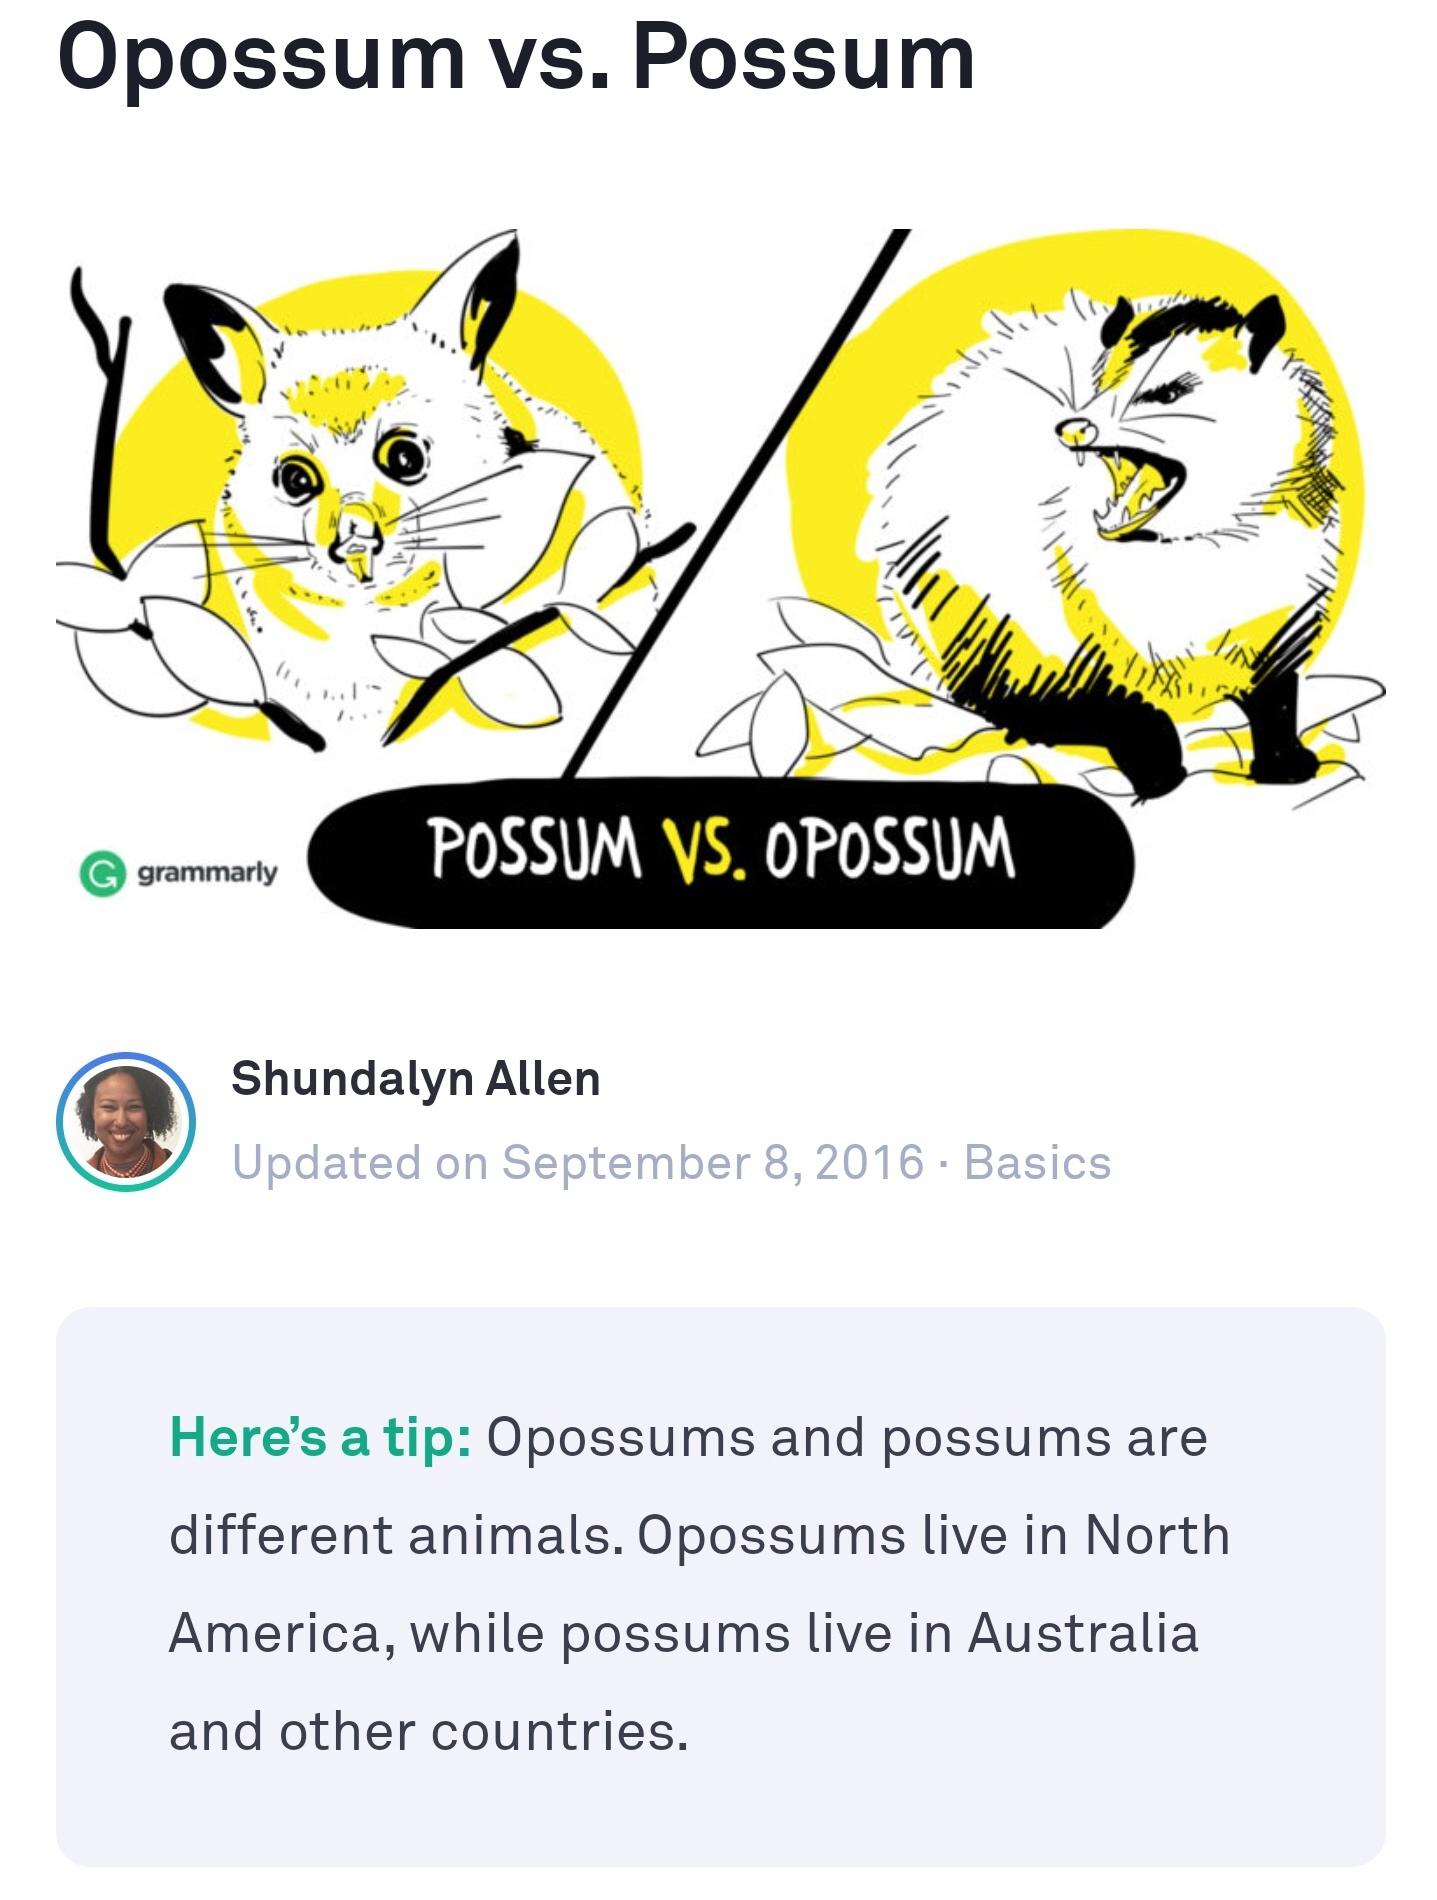 cartoon - Opossum vs. Possum li Possum Vs. Opossum G grammarly Shundalyn Allen Updated on Basics Here's a tip Opossums and possums are different animals. Opossums live in North America, while possums live in Australia and other countries.